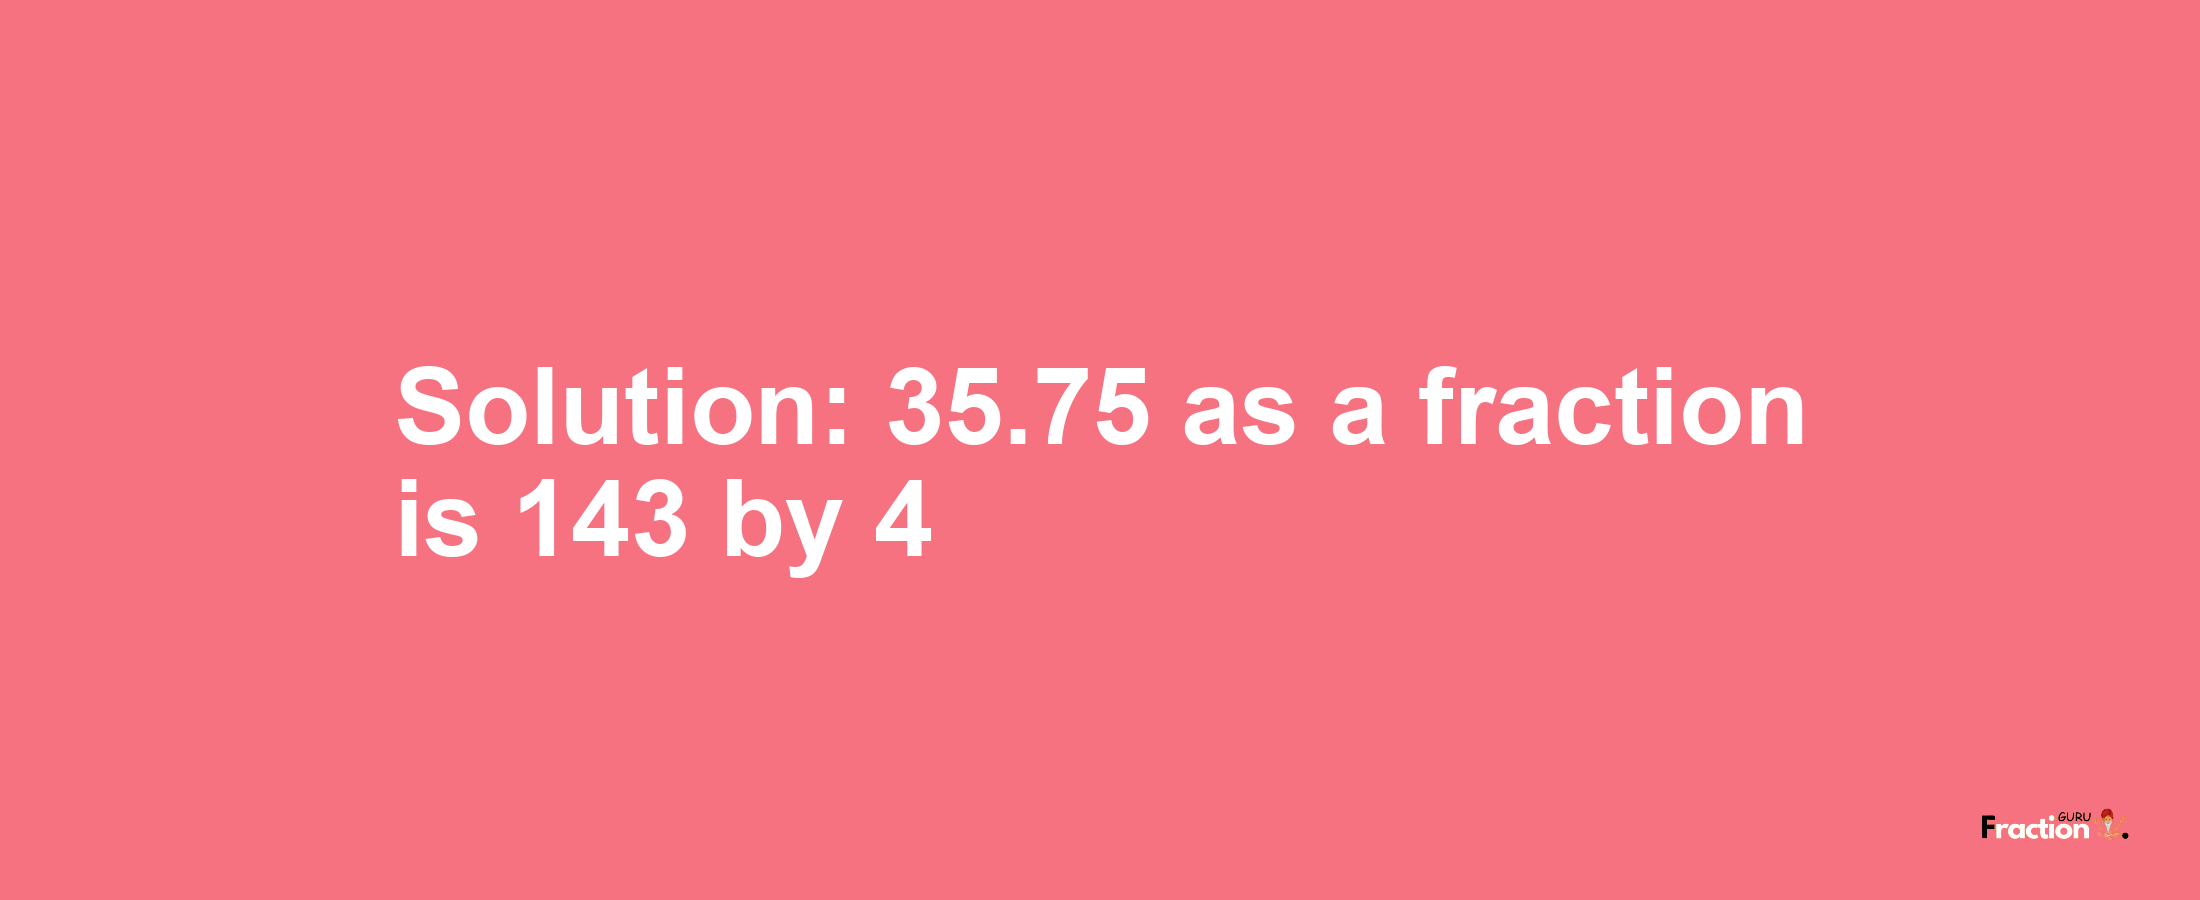 Solution:35.75 as a fraction is 143/4